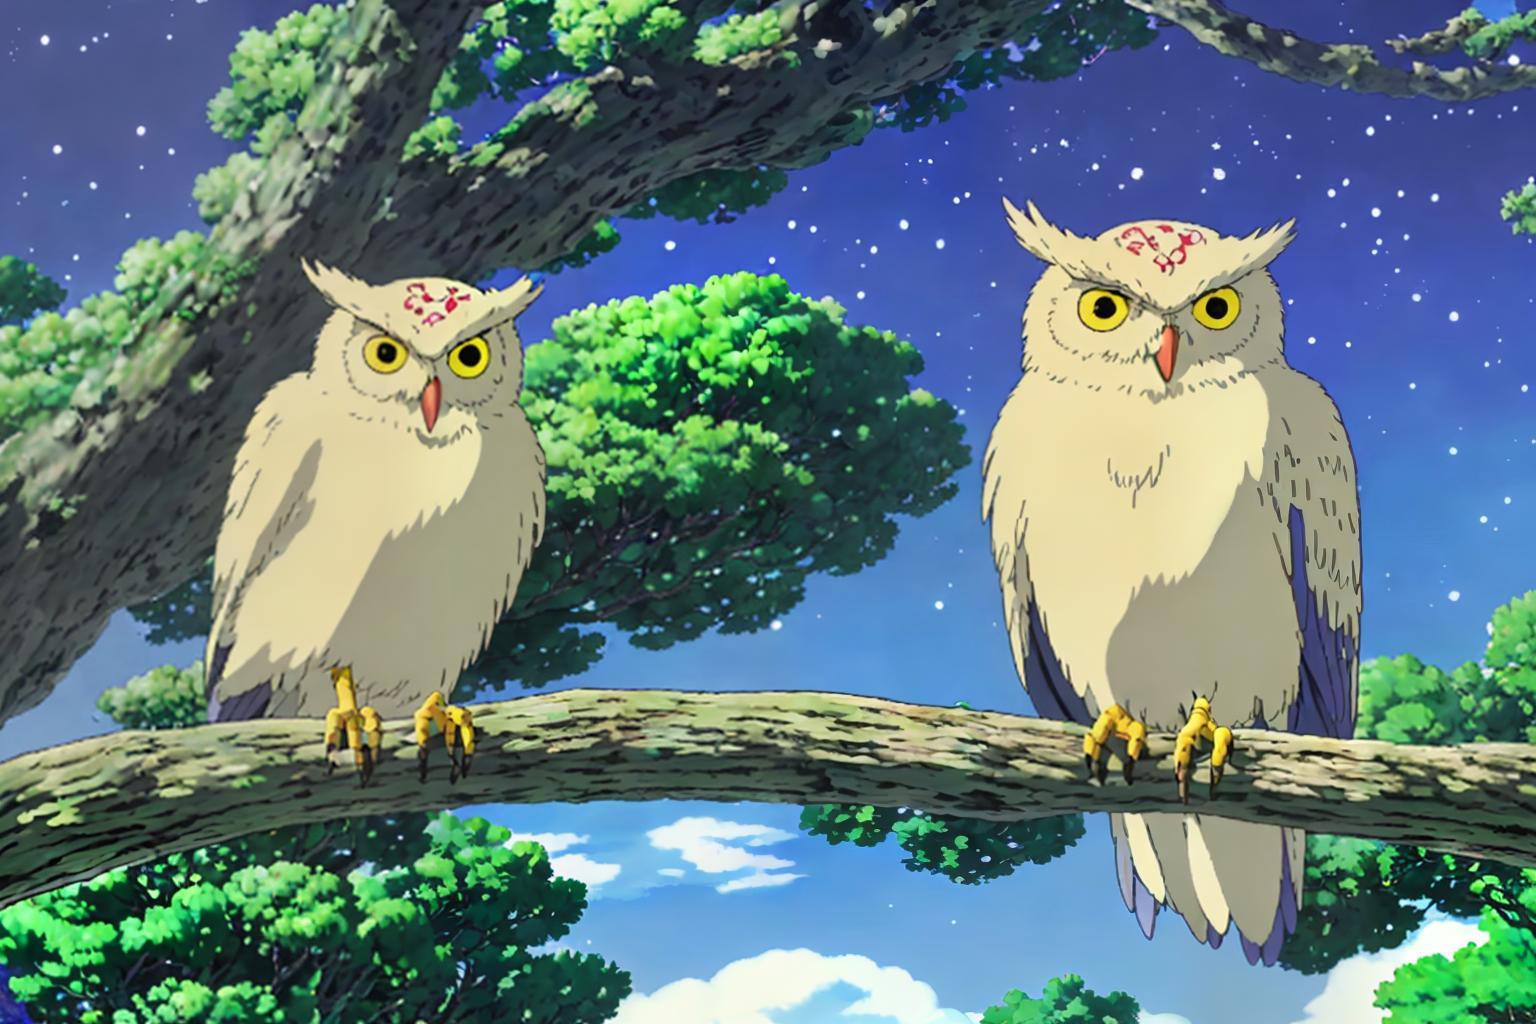 ai generated Studio Ghibli poster. Beautiful poster depicting two owls sitting on a tree at night. The stars are visible in the background. The colors are blue, green and beige.